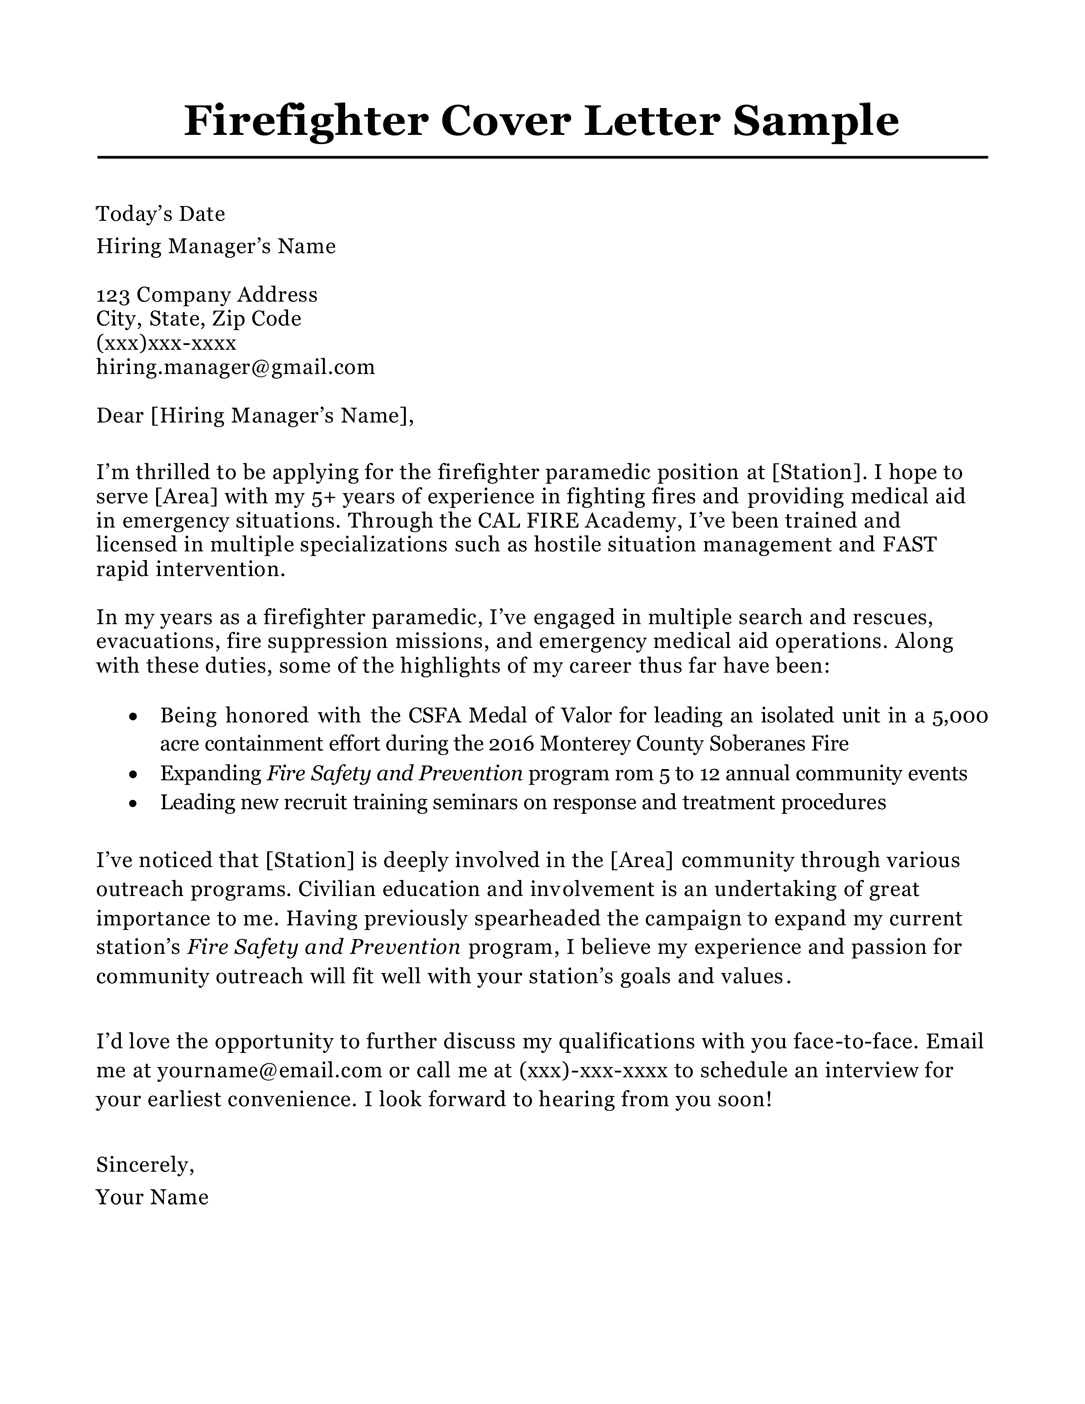 Letter Of Intent Vs Cover Letter from resumecompanion.com